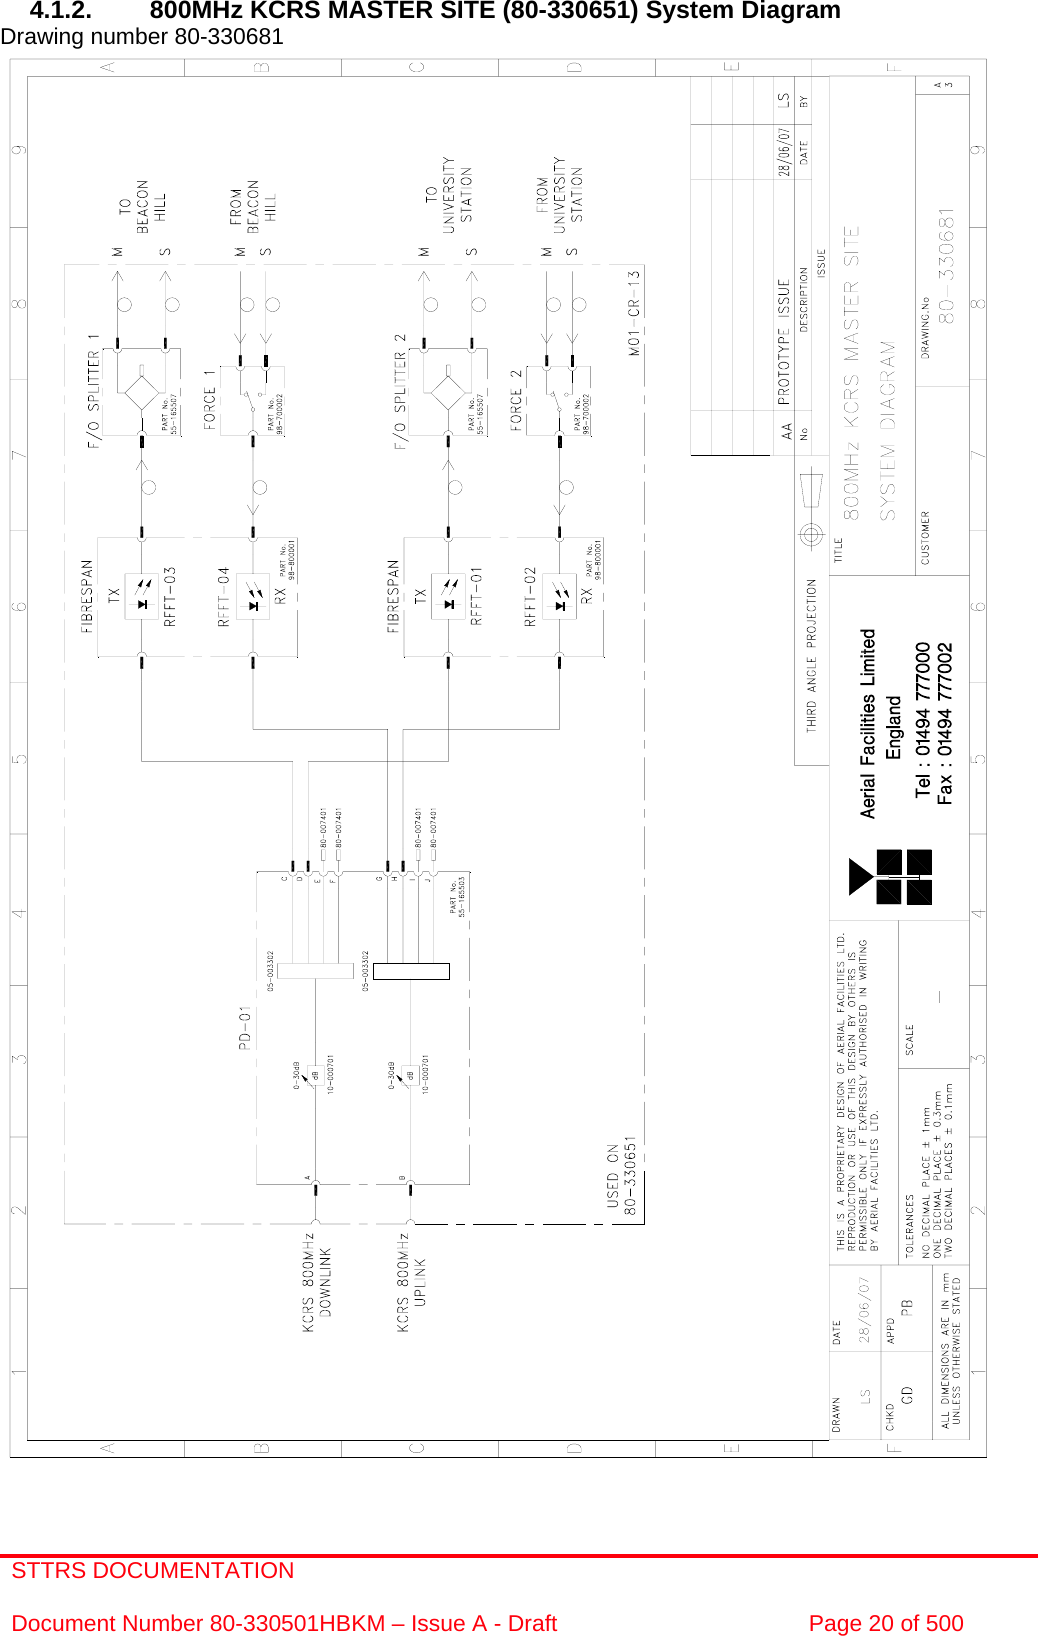 STTRS DOCUMENTATION  Document Number 80-330501HBKM – Issue A - Draft  Page 20 of 500   4.1.2.  800MHz KCRS MASTER SITE (80-330651) System Diagram  Drawing number 80-330681                                                       